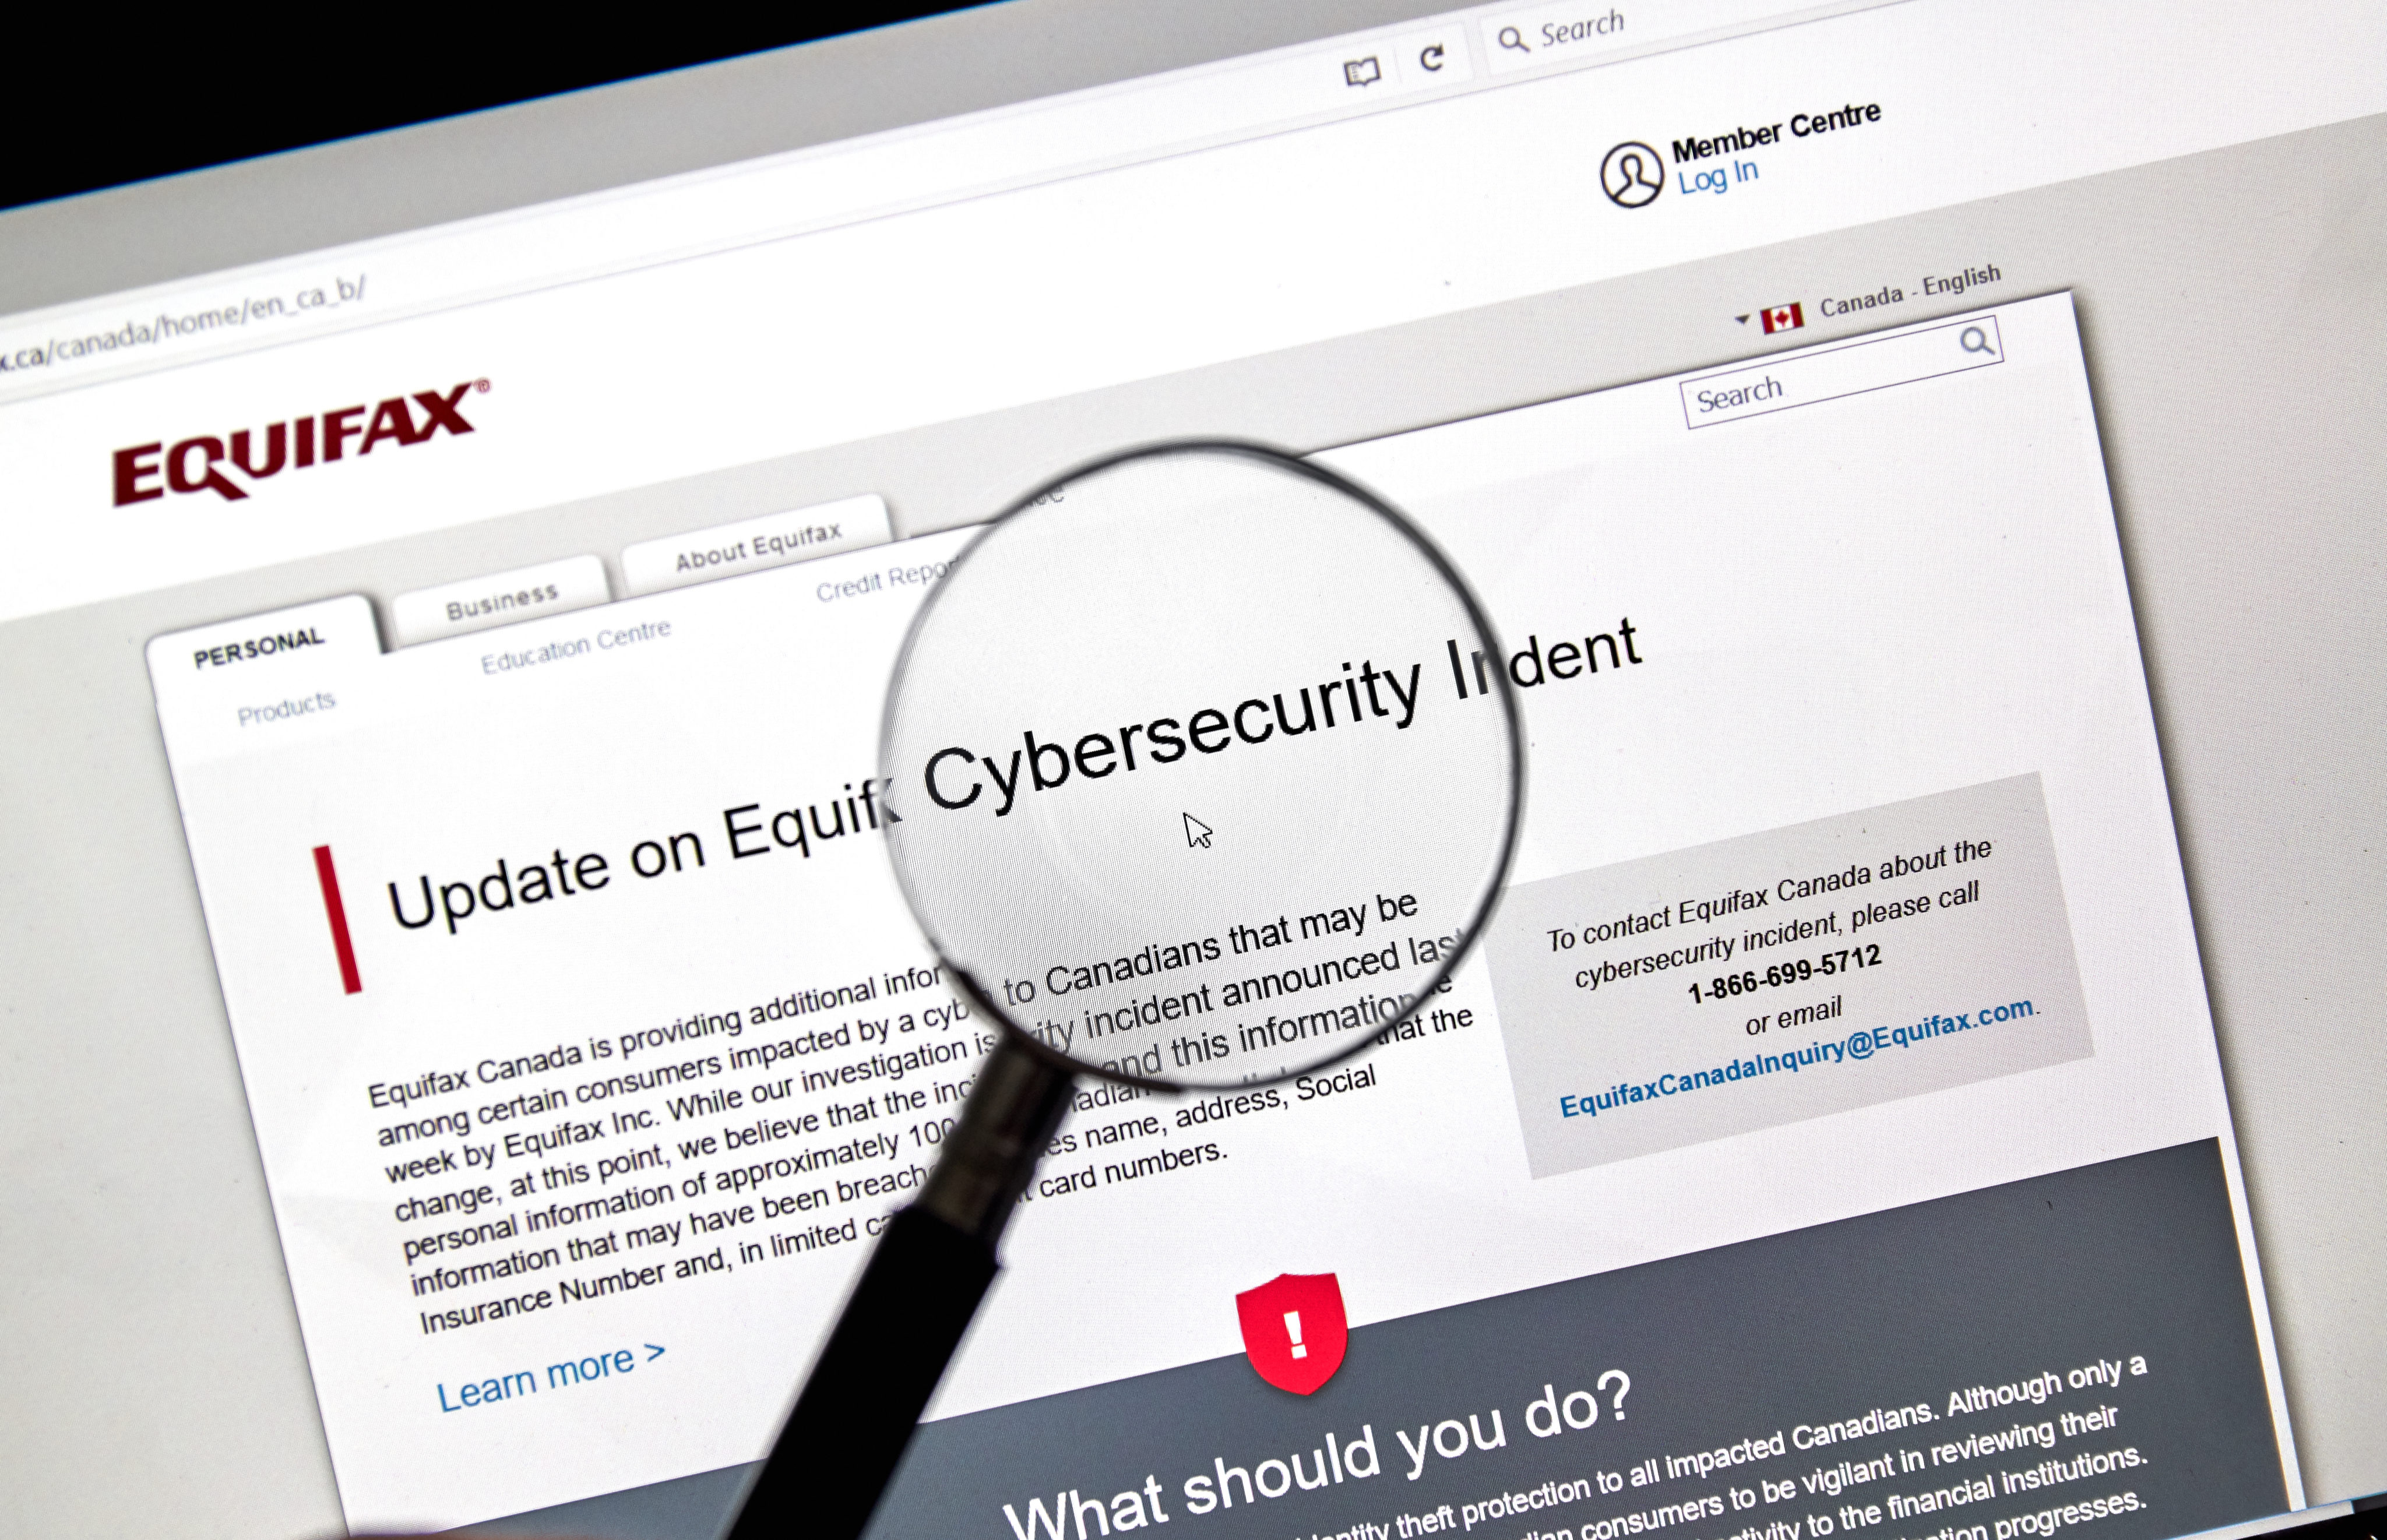 call equifax to lift security freeze